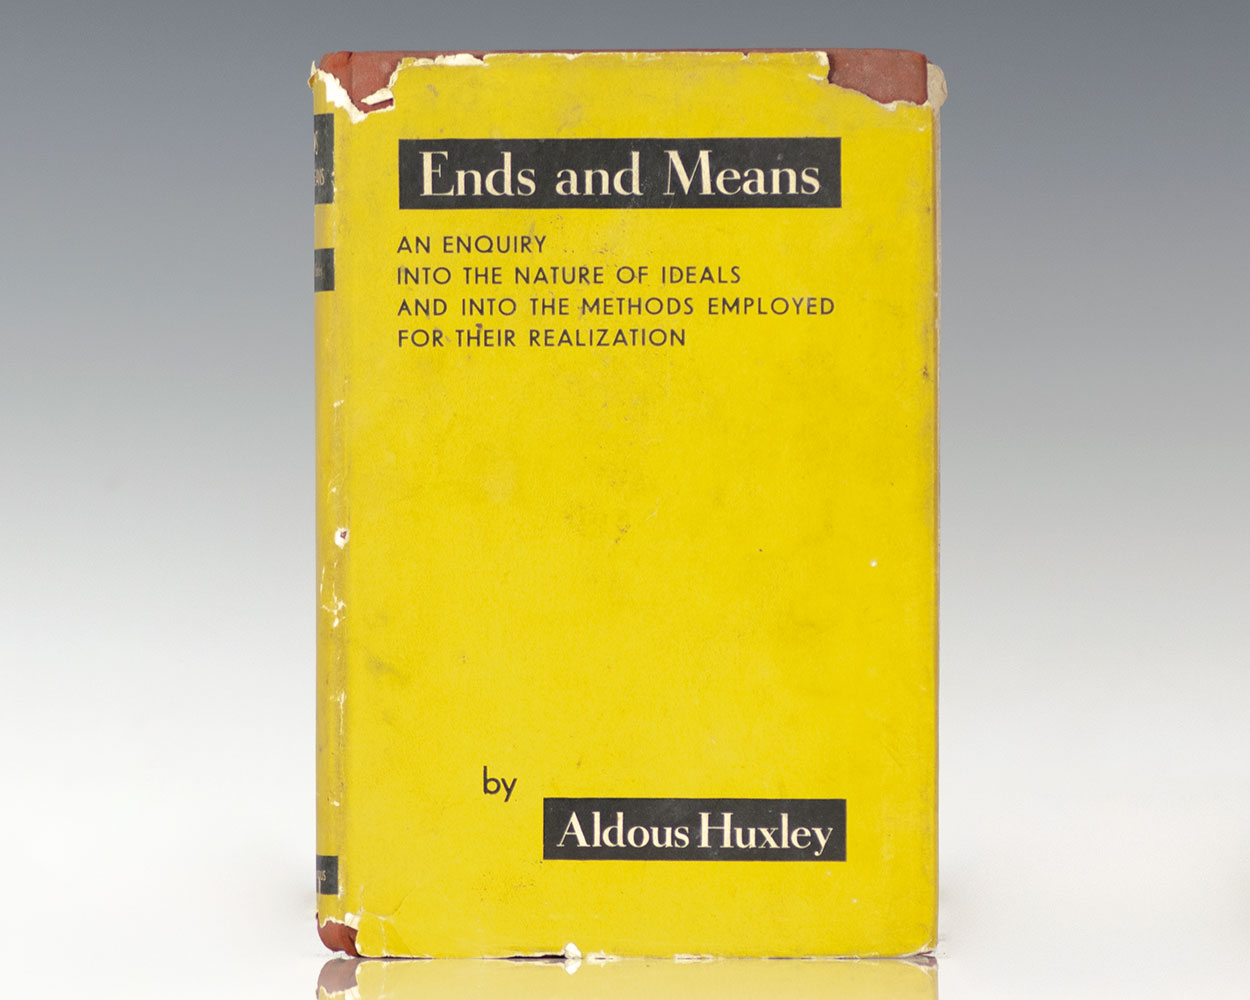 Ends and Means: An Enquiry into the Nature of Ideals and into the